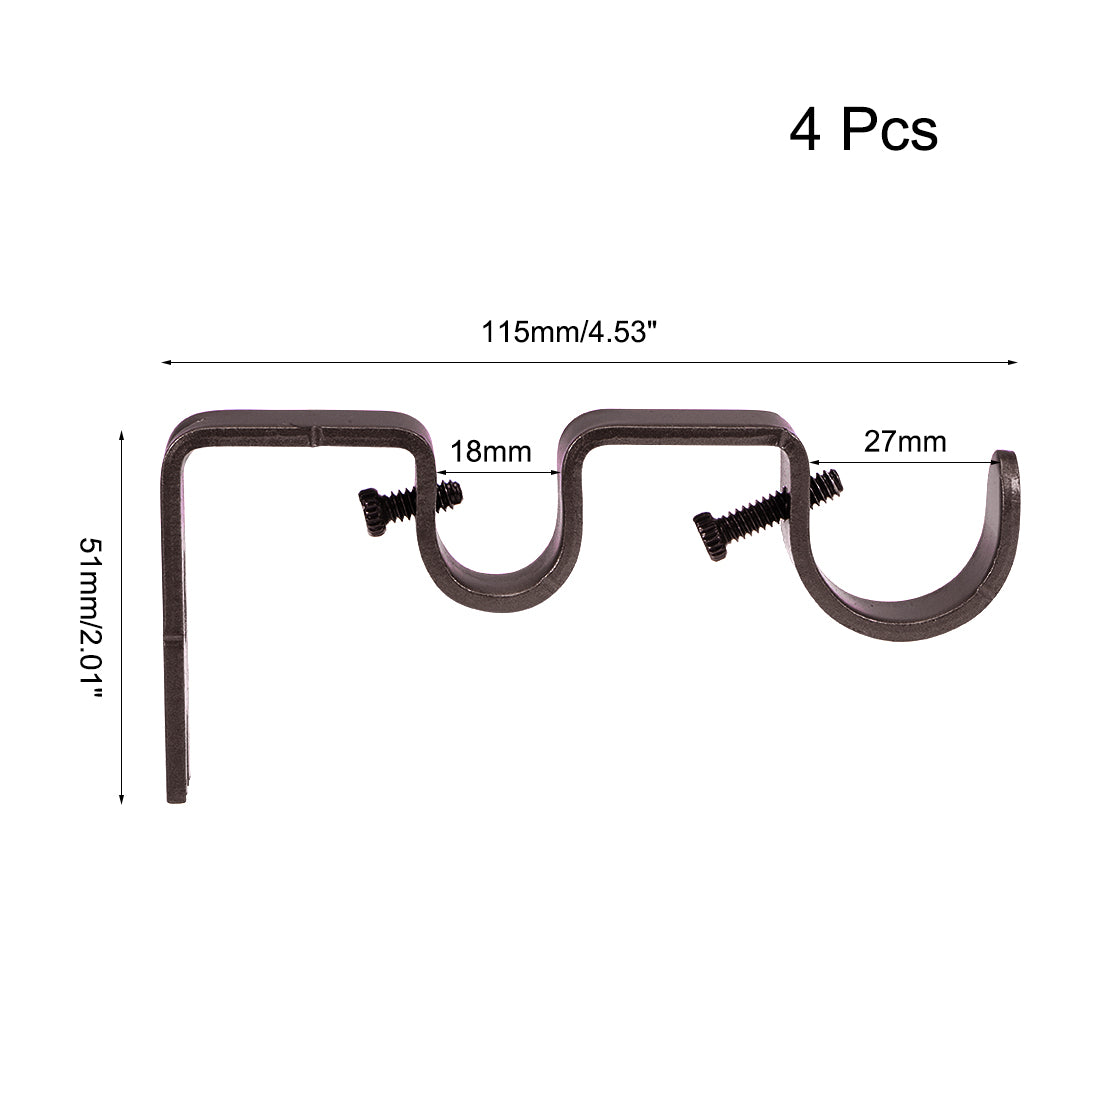 uxcell Uxcell Curtain Rod Bracket Iron Double Holder Support for 18mm 27mm Drapery Rod, 115 x 51 x 16mm Brown 4Pcs